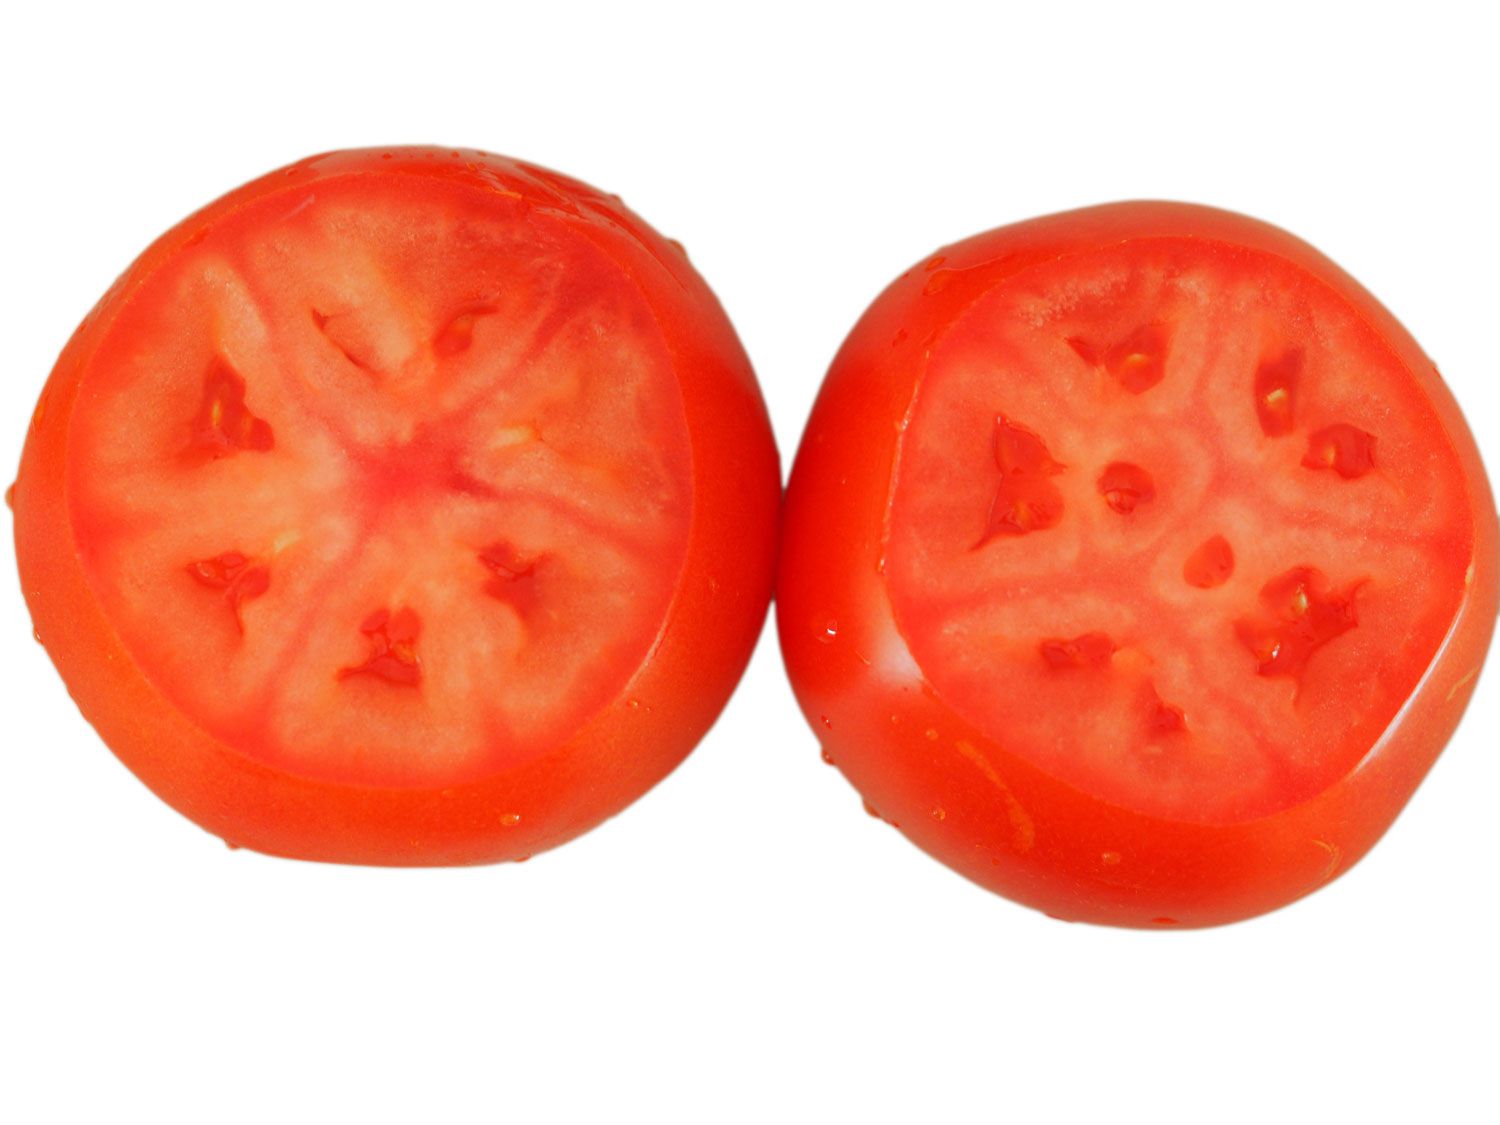 Overhead view of two tomatoes with their top cut off so you can see inside. Here, the refrigerated sample is to the left, with a slightly lighter, less red color, though the difference is just barely visible.